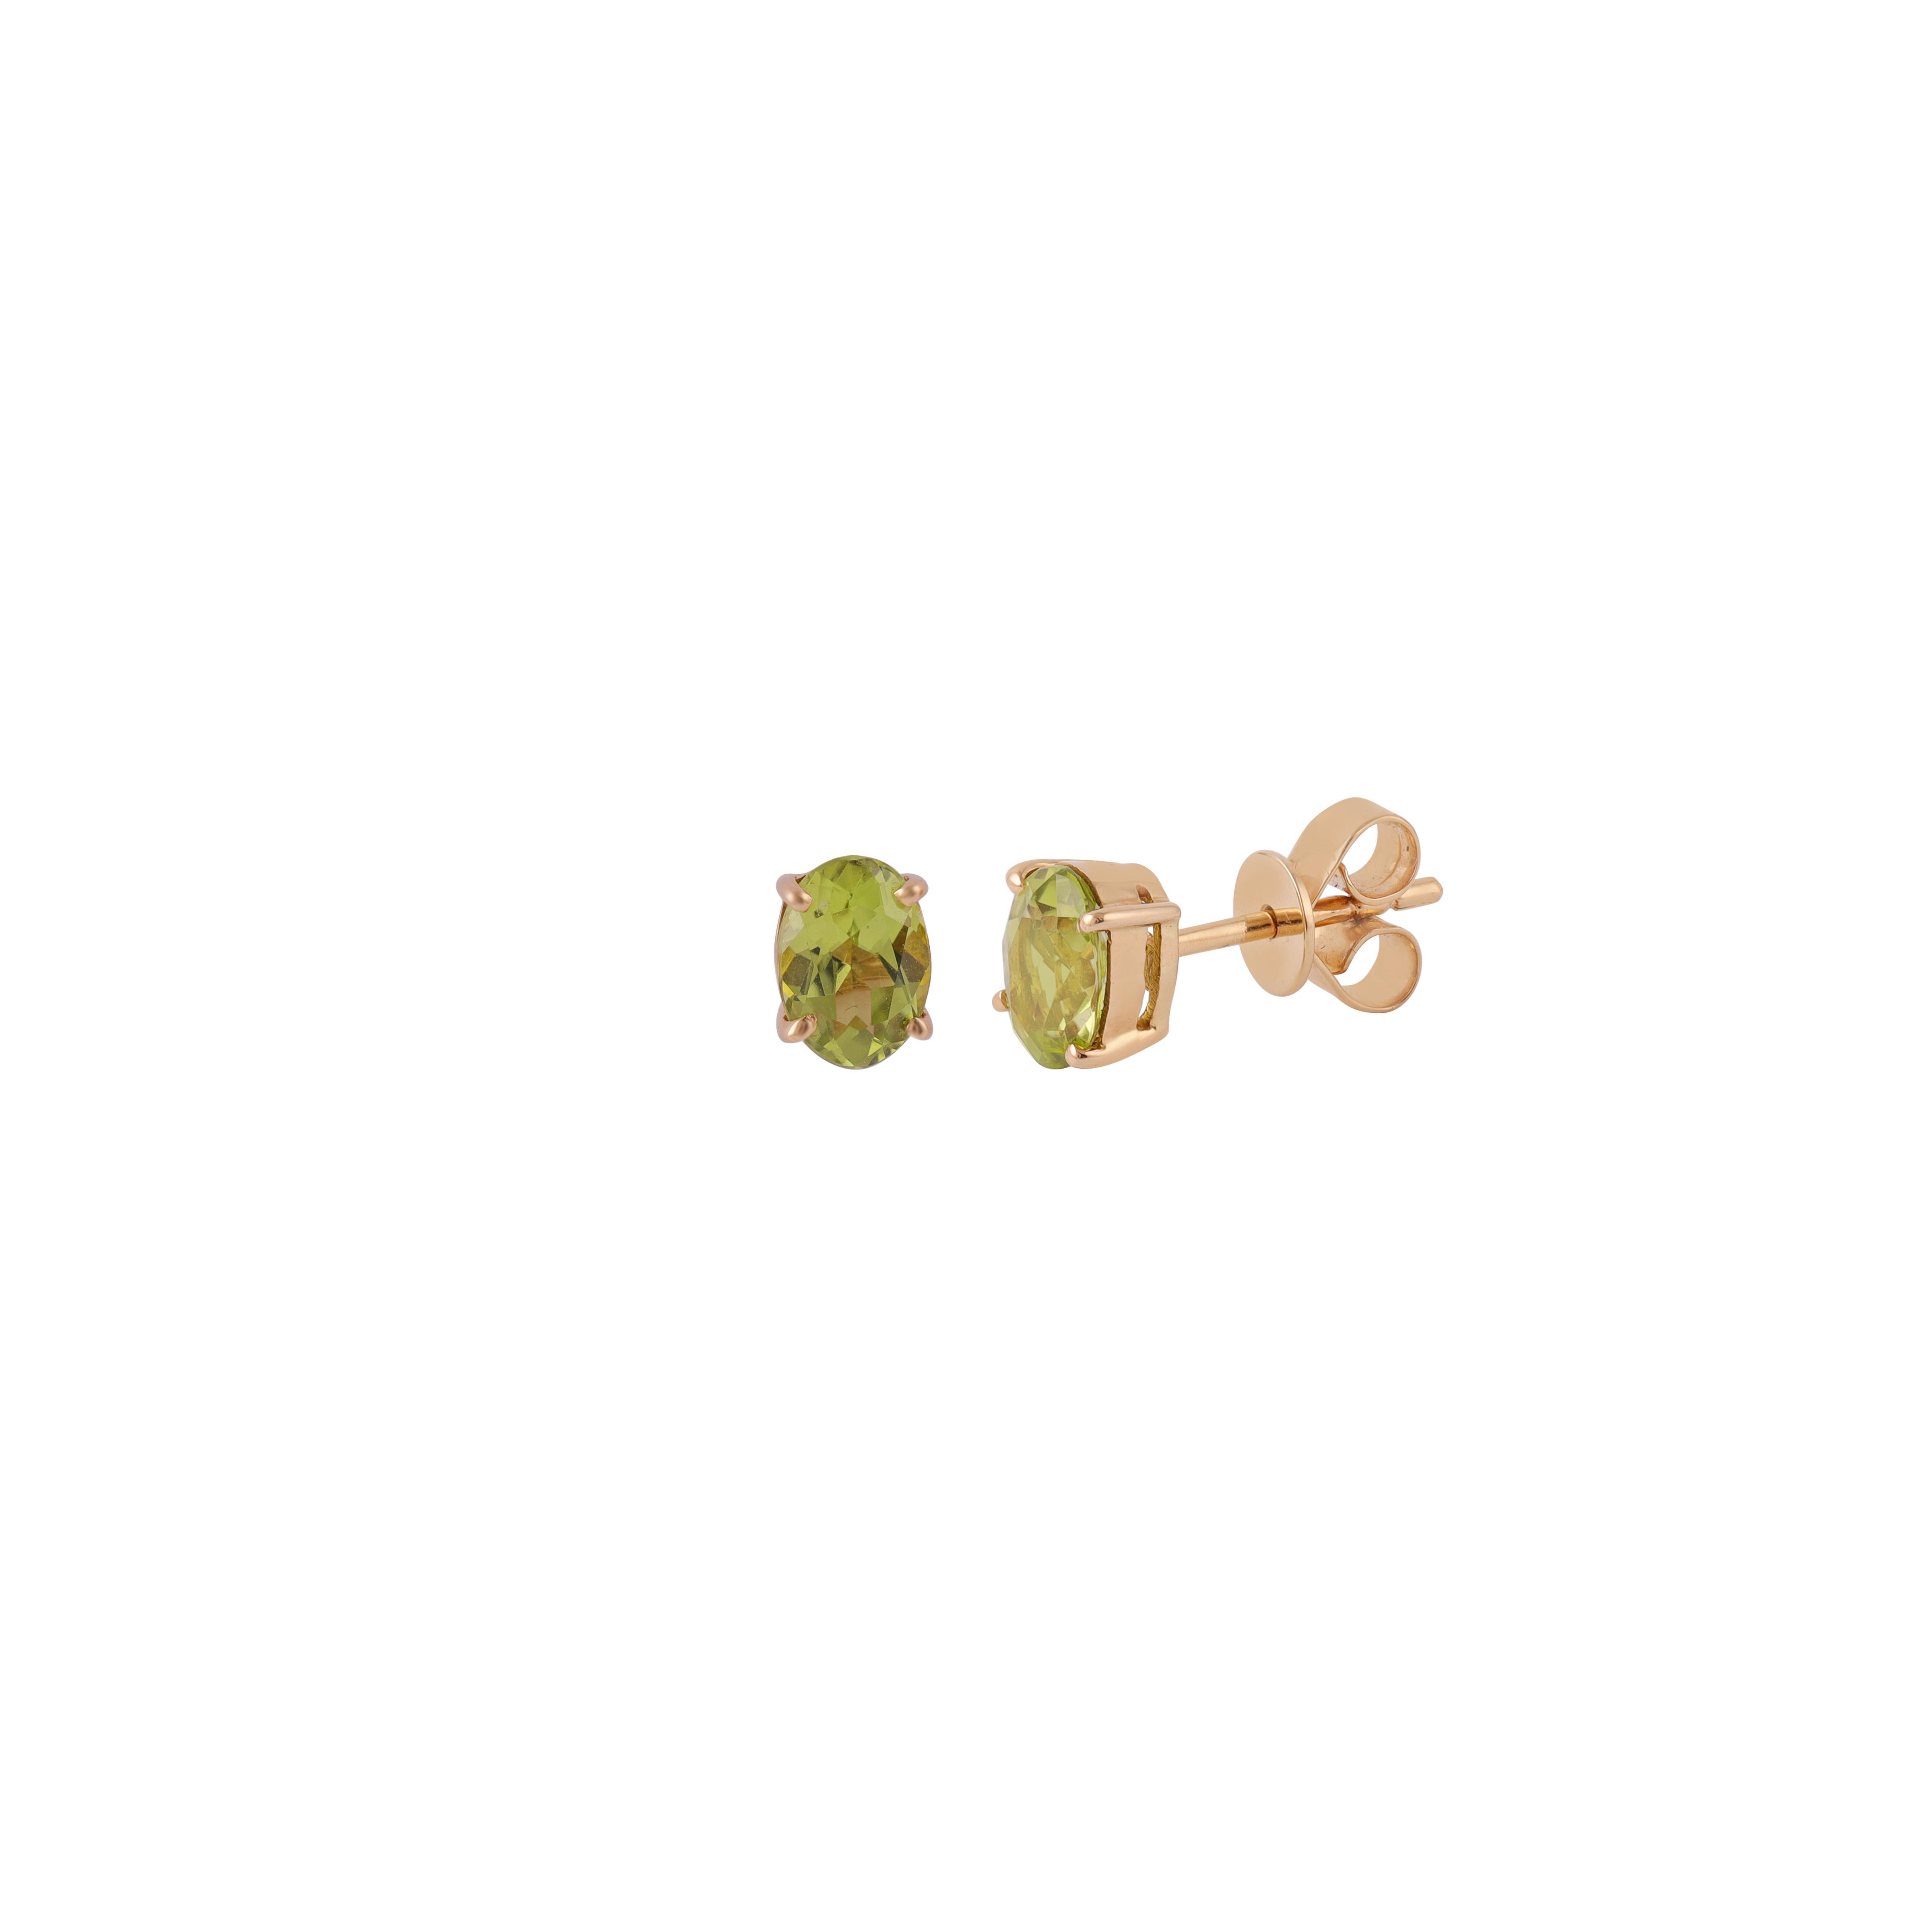 2.06 Carat Peridot Stud Earrings in 18k Yellow Gold In New Condition For Sale In Jaipur, Rajasthan